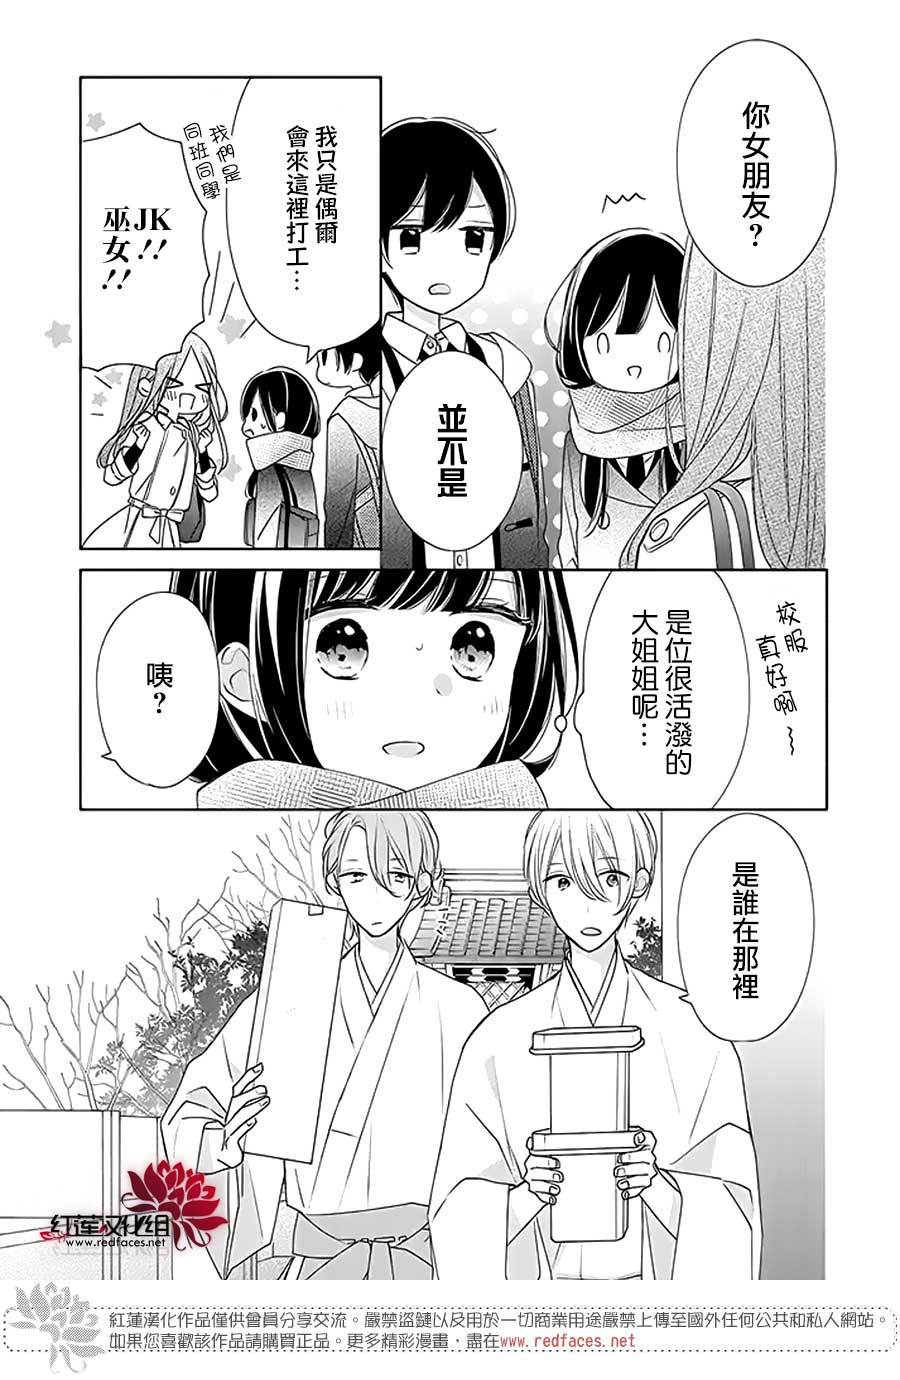 If given a second chance - 29話 - 3